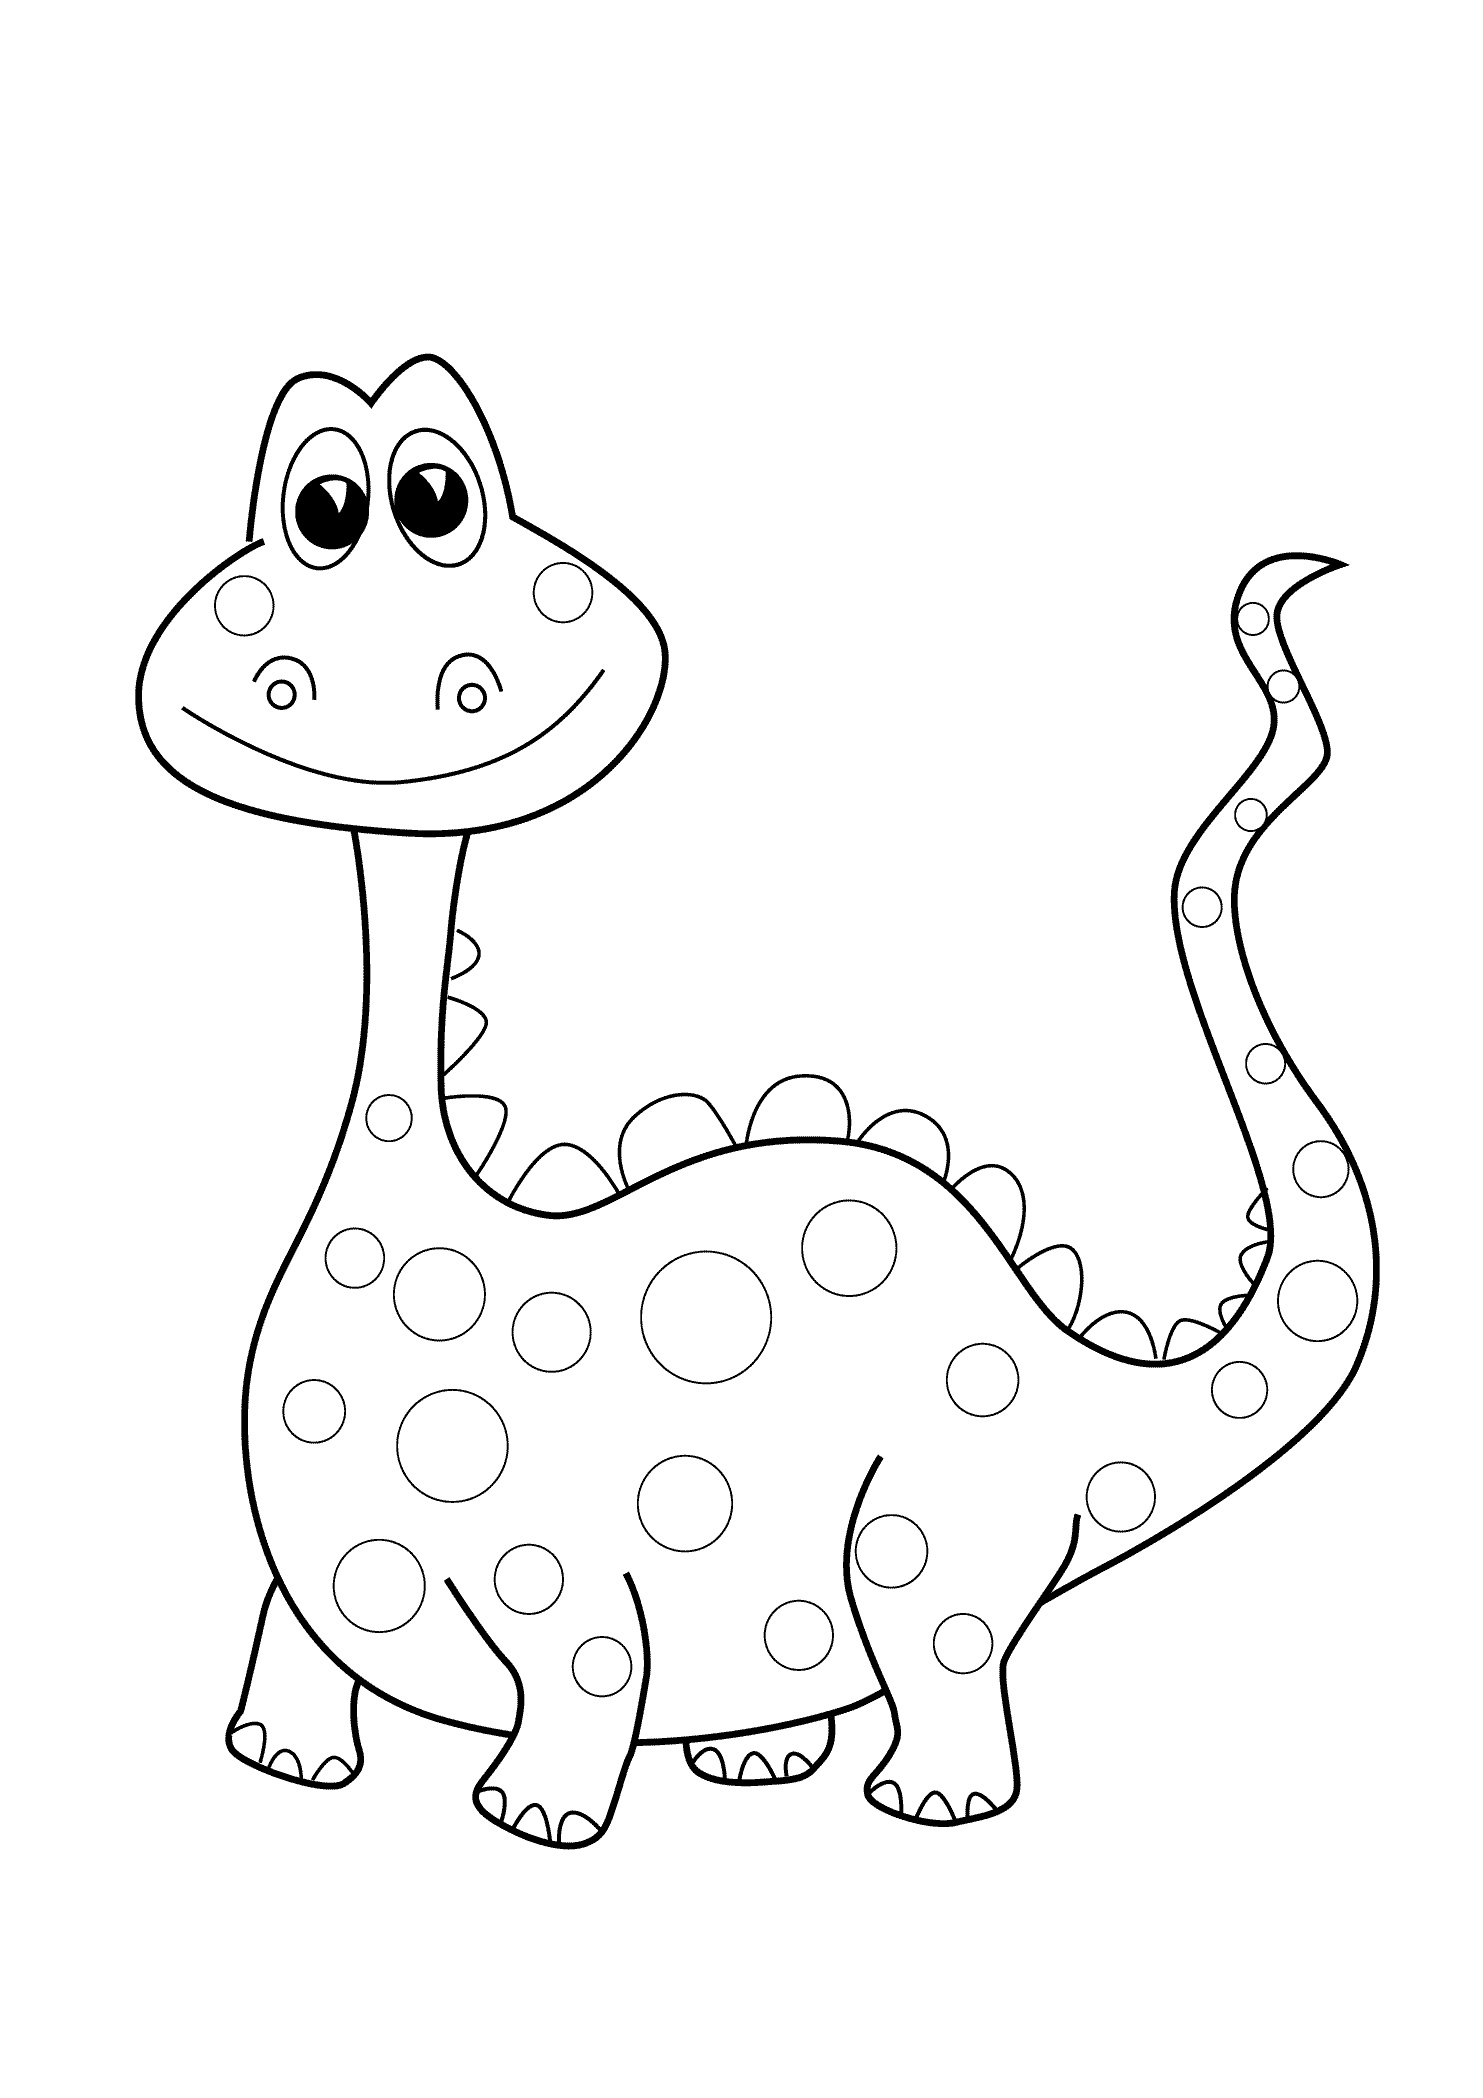 Preschool Dinosaur Coloring Page Easy To Color For Kids Print Color Craft